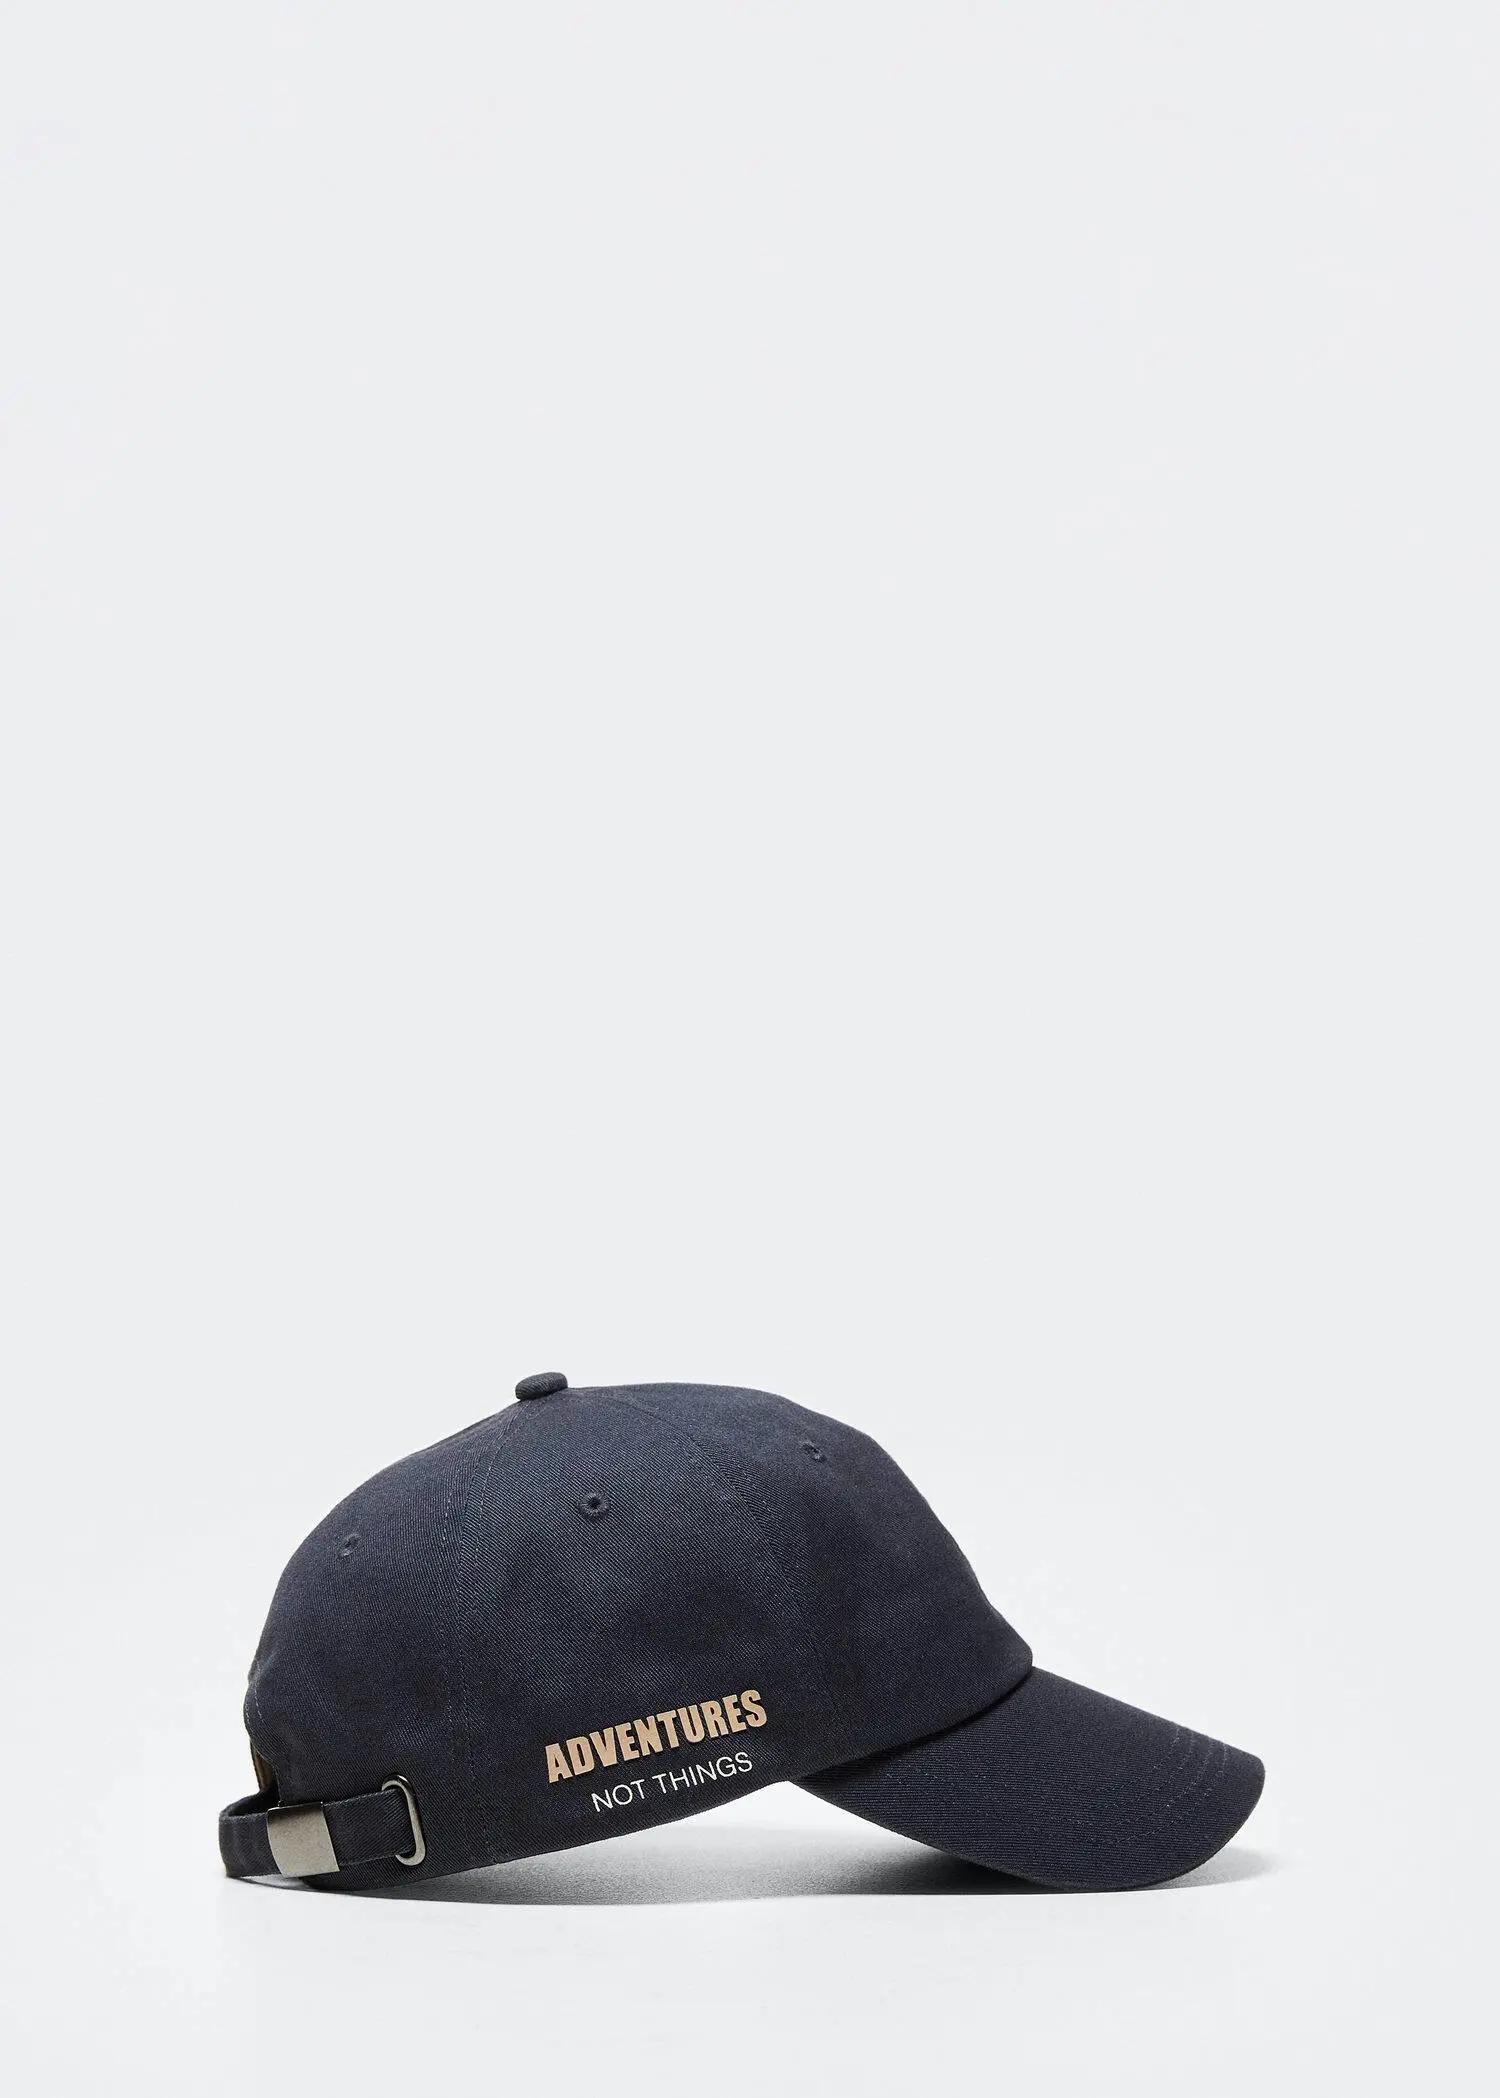 Mango Graphic cotton cap. a hat that is sitting on top of a table. 